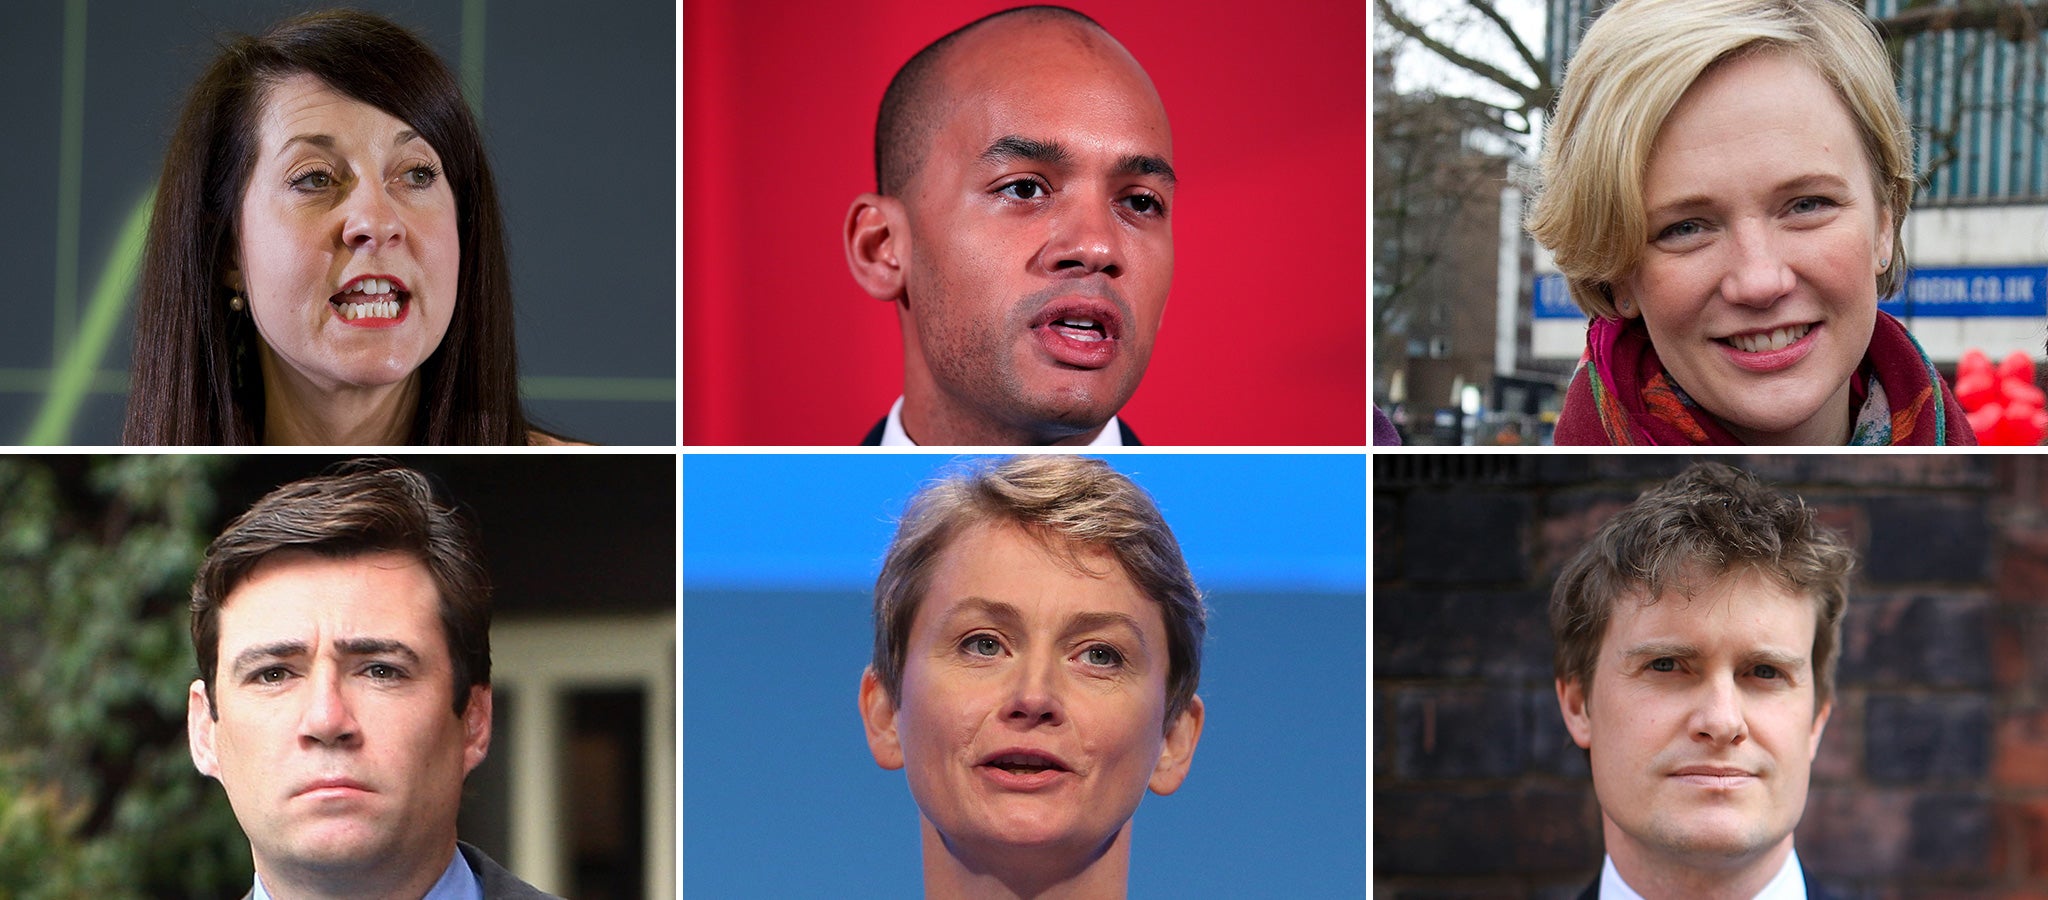 Who do you want to be the next Labour leader?